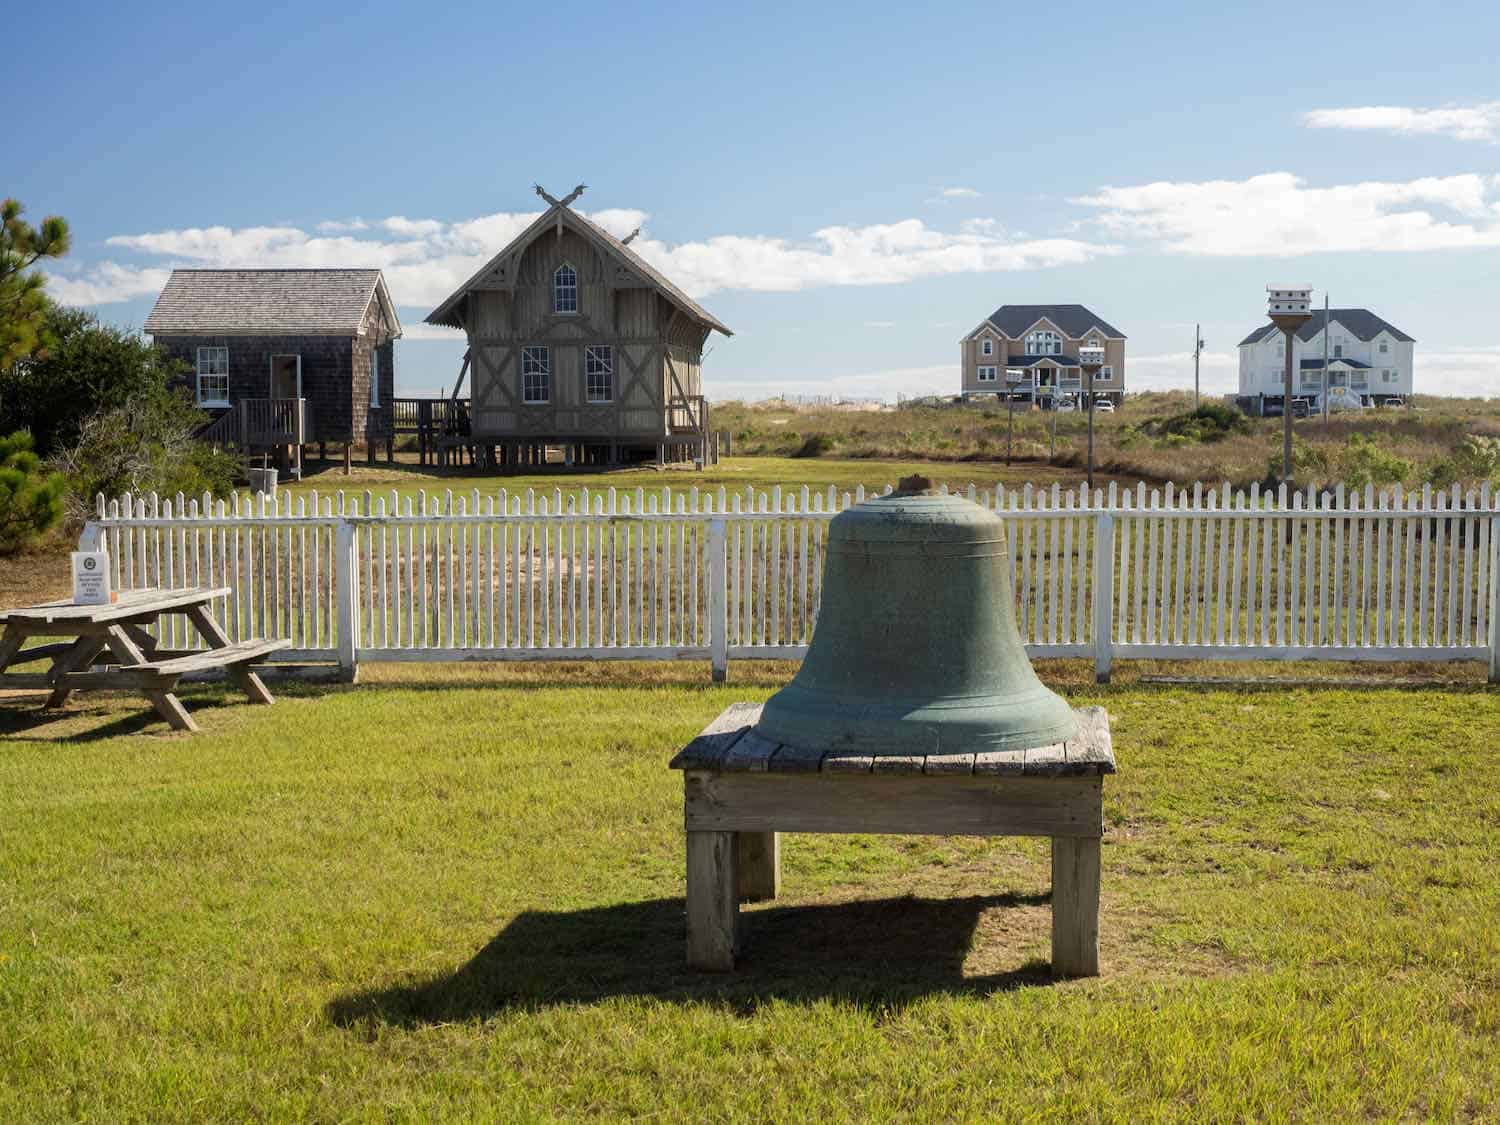 Big bell sitting in front of a white picket fence with four buildings behind the fence.